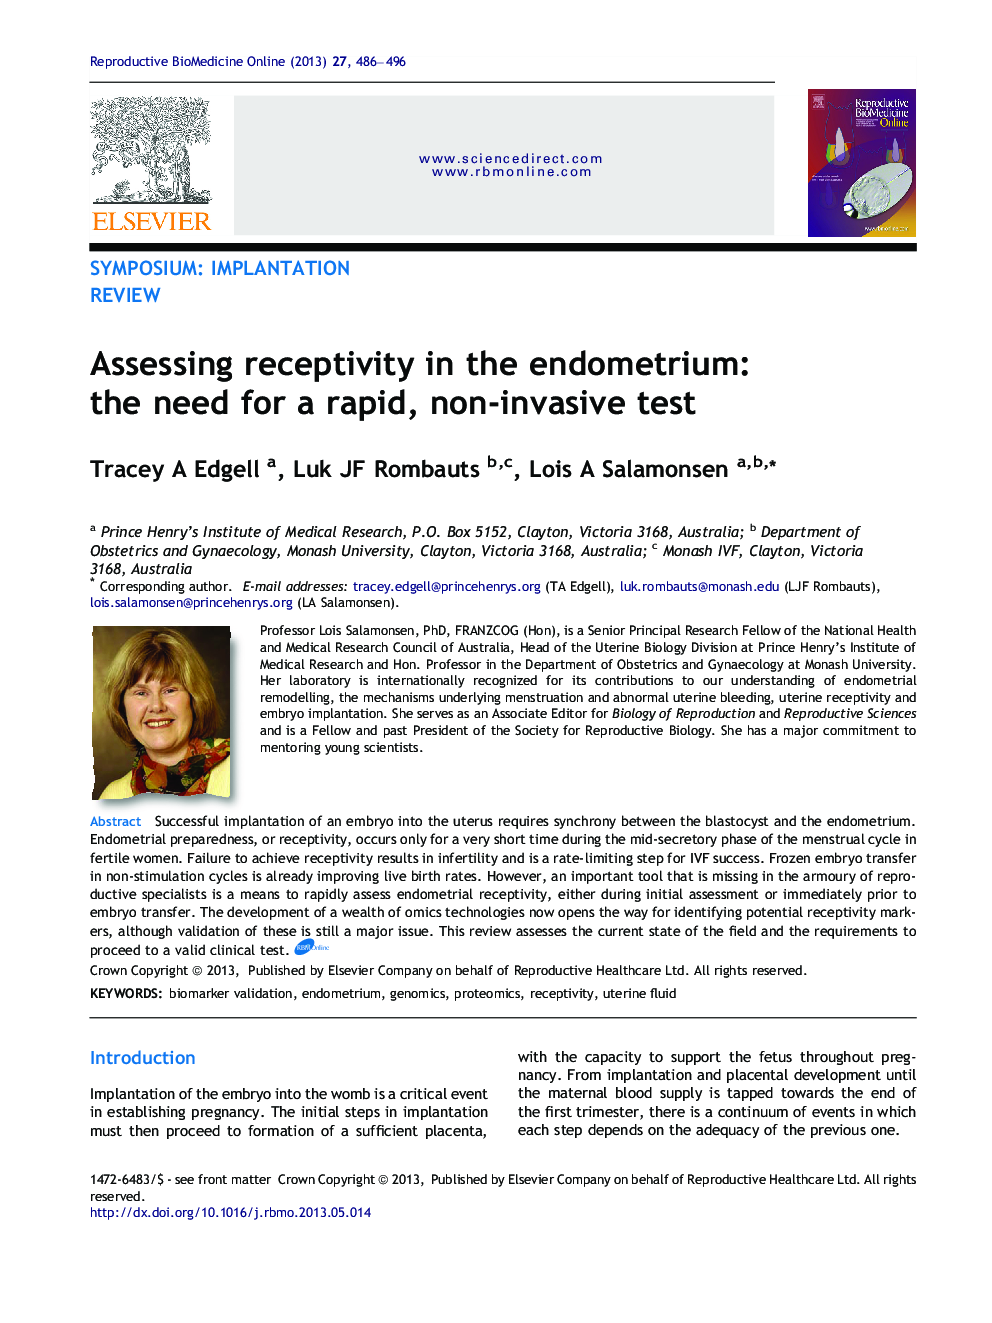 Assessing receptivity in the endometrium: the need for a rapid, non-invasive test 